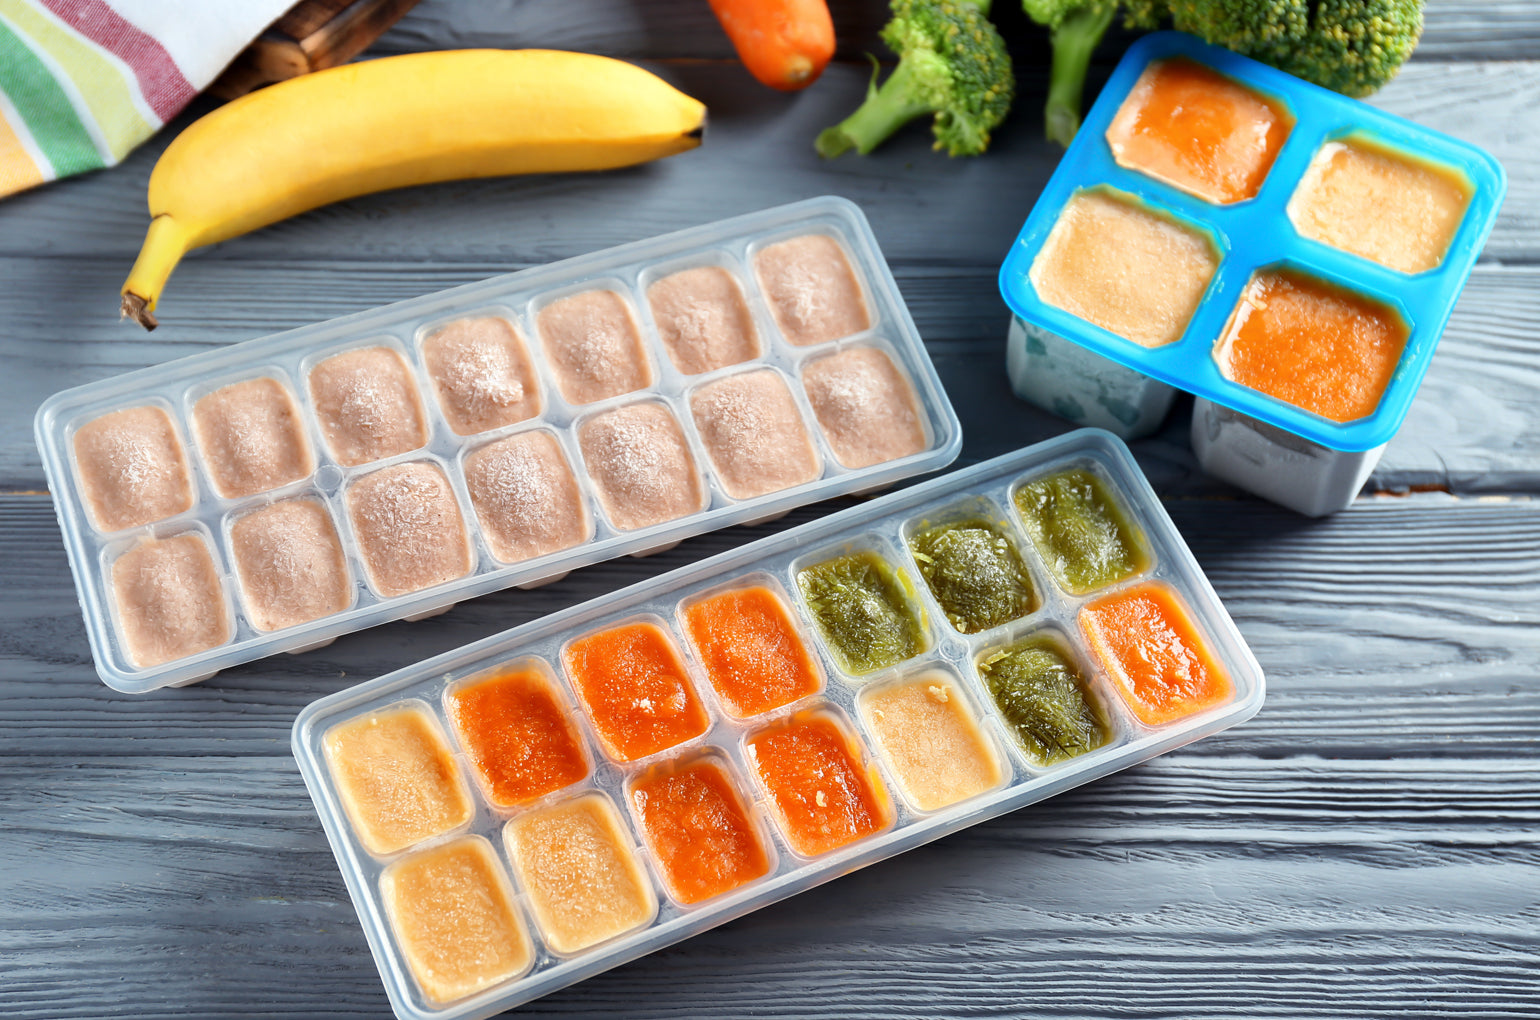 Frozen Baby Food: Recipes, Preparation, Storage, and Safety